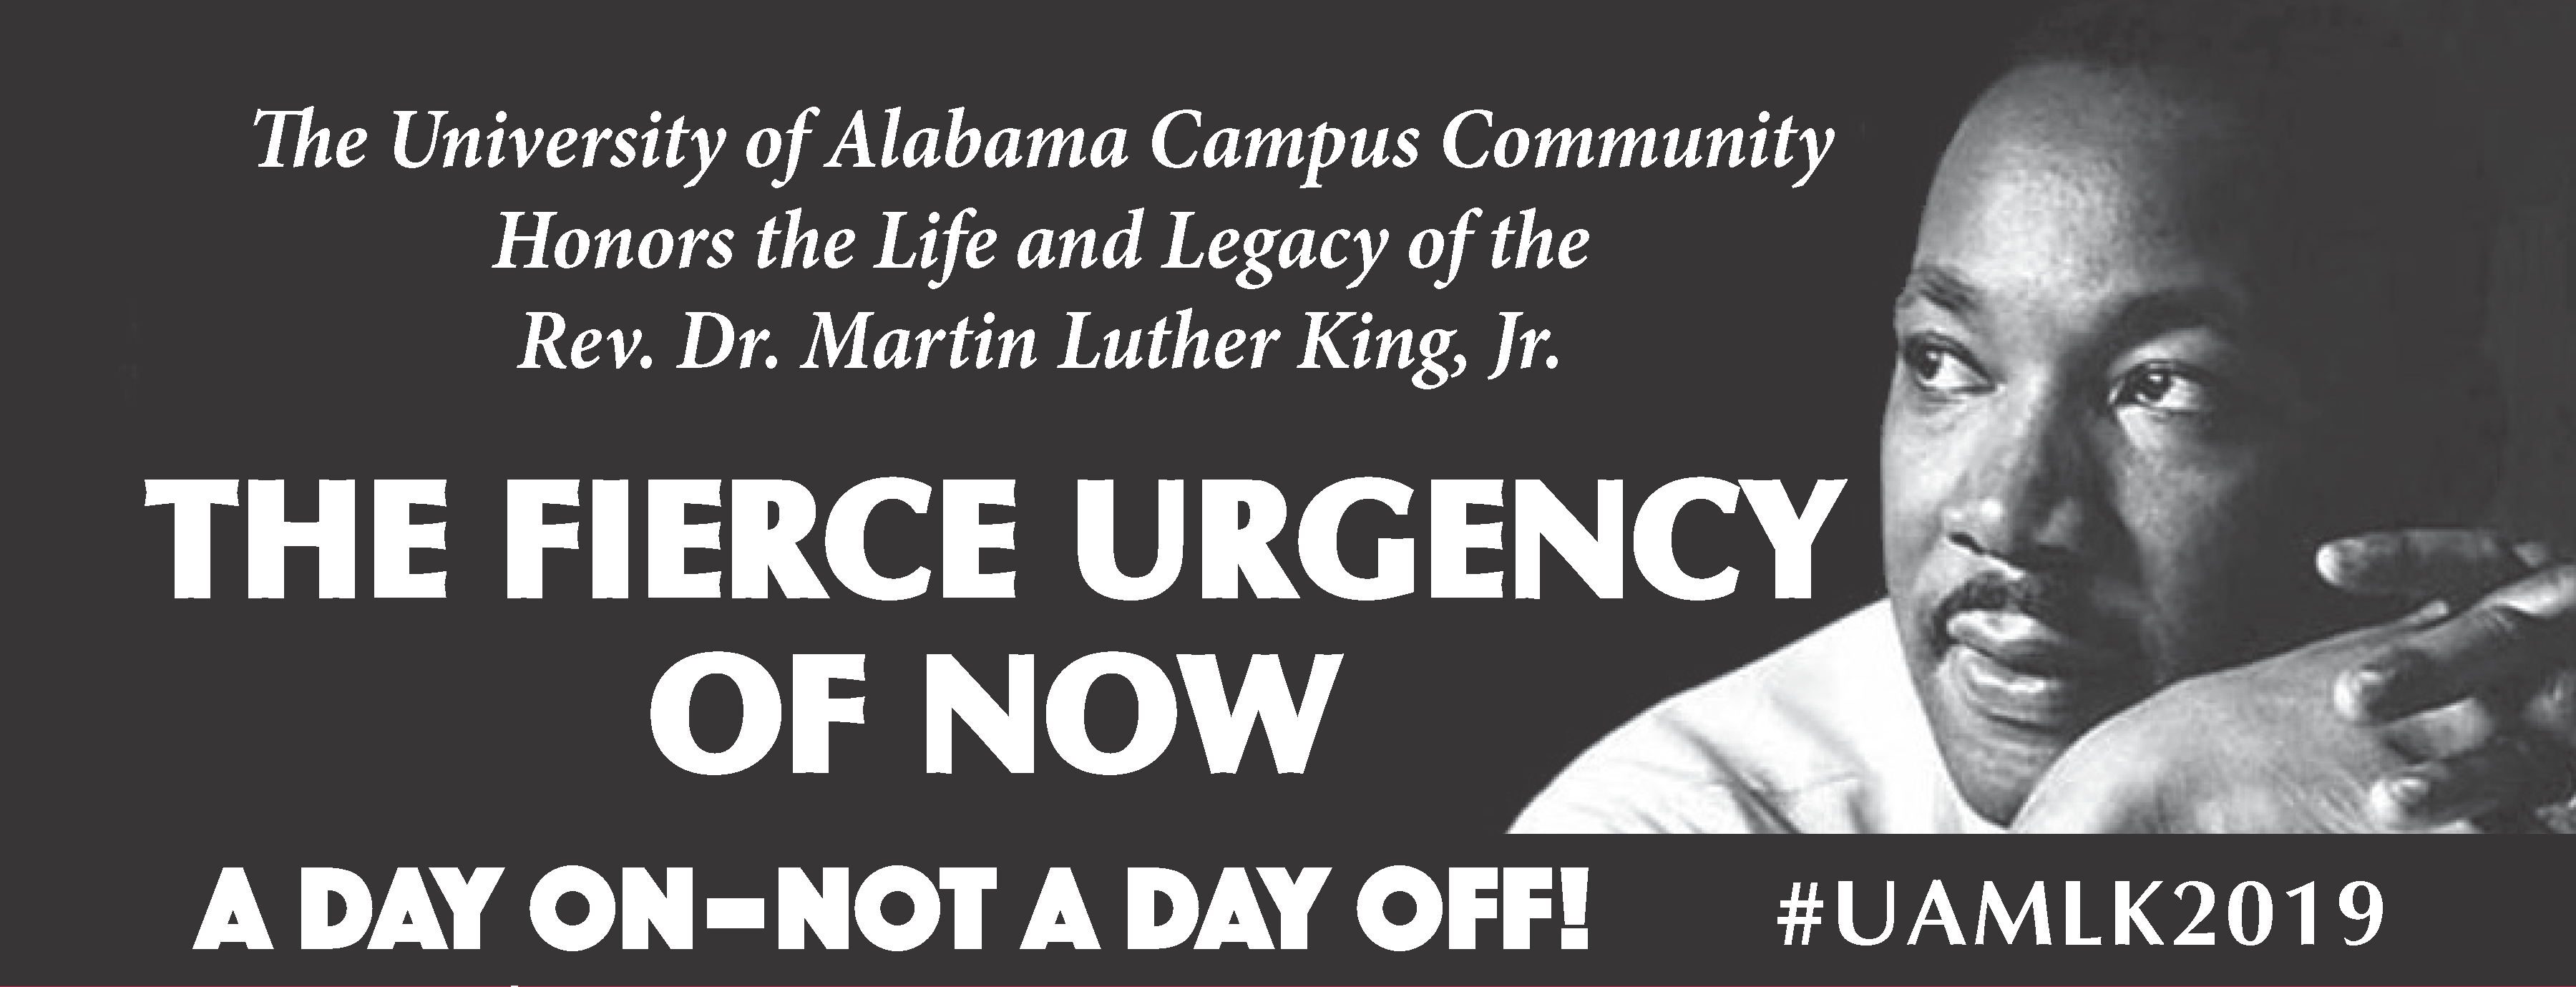 UA Campus Community honors the life and legacy of Reverend Dr. Martin Luther King Jr.: The Fierce Urgency of Now